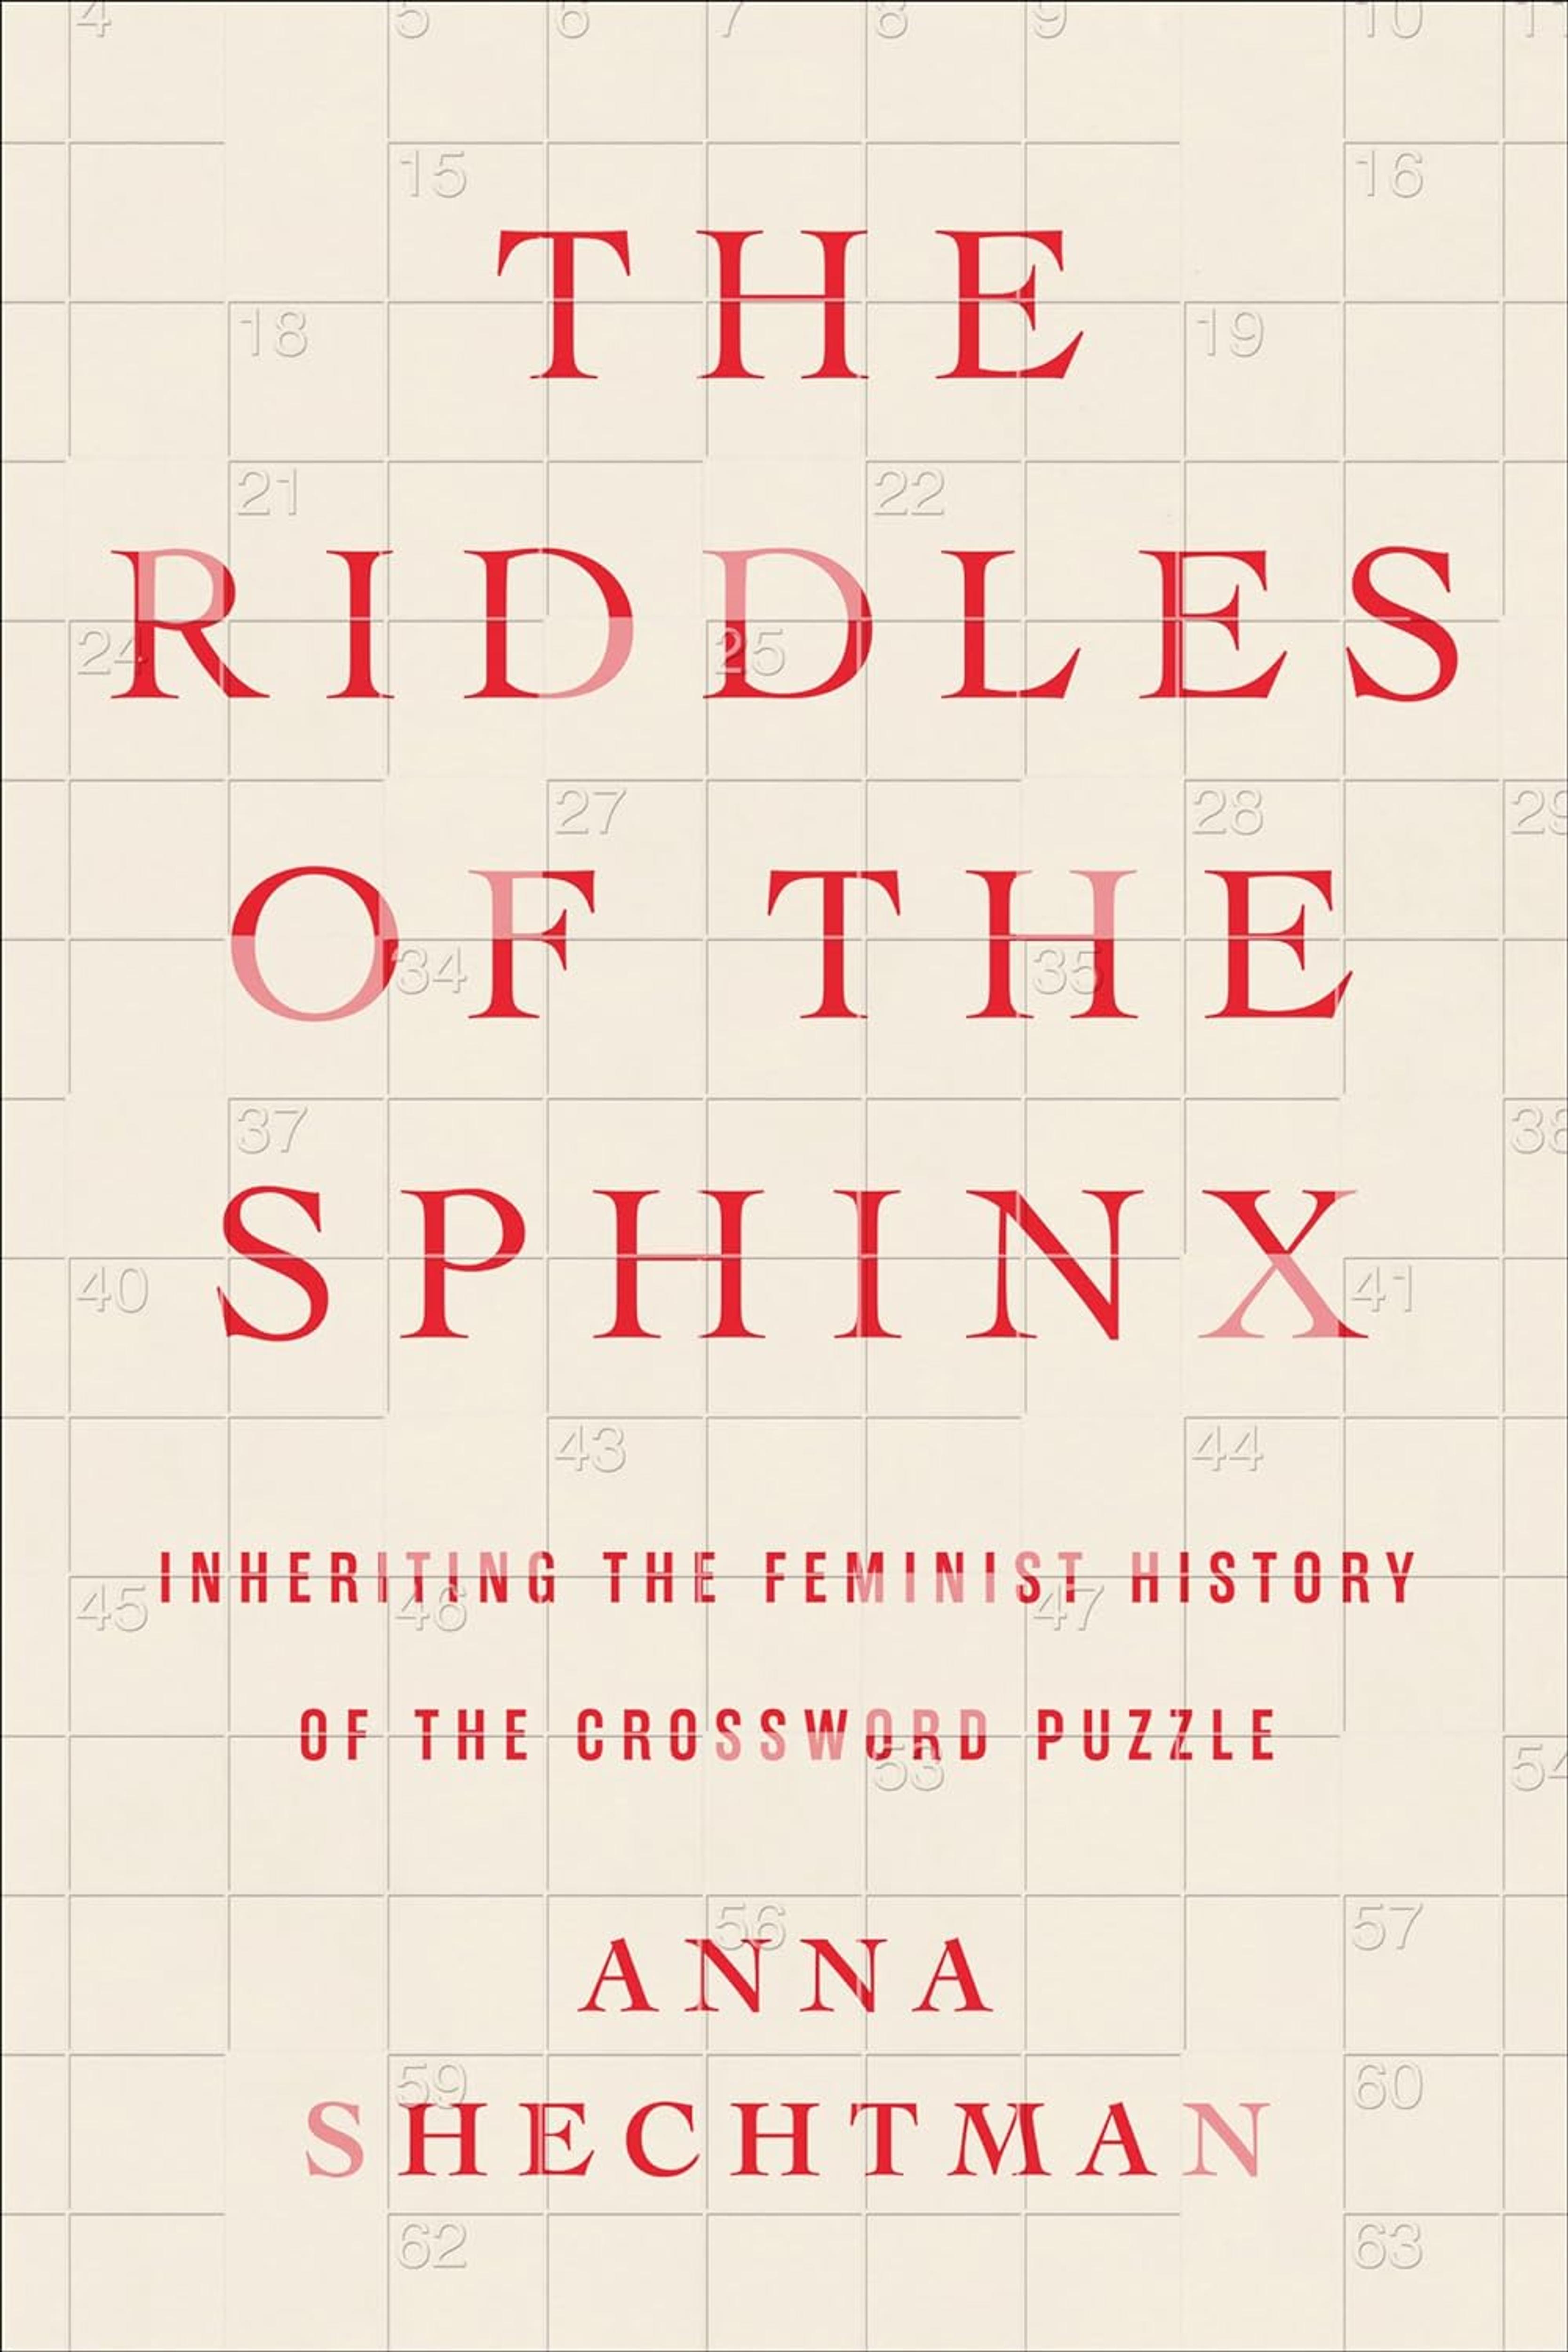 Through a Grid, Darkly: On Anna Shechtman’s “The Riddles of the Sphinx”